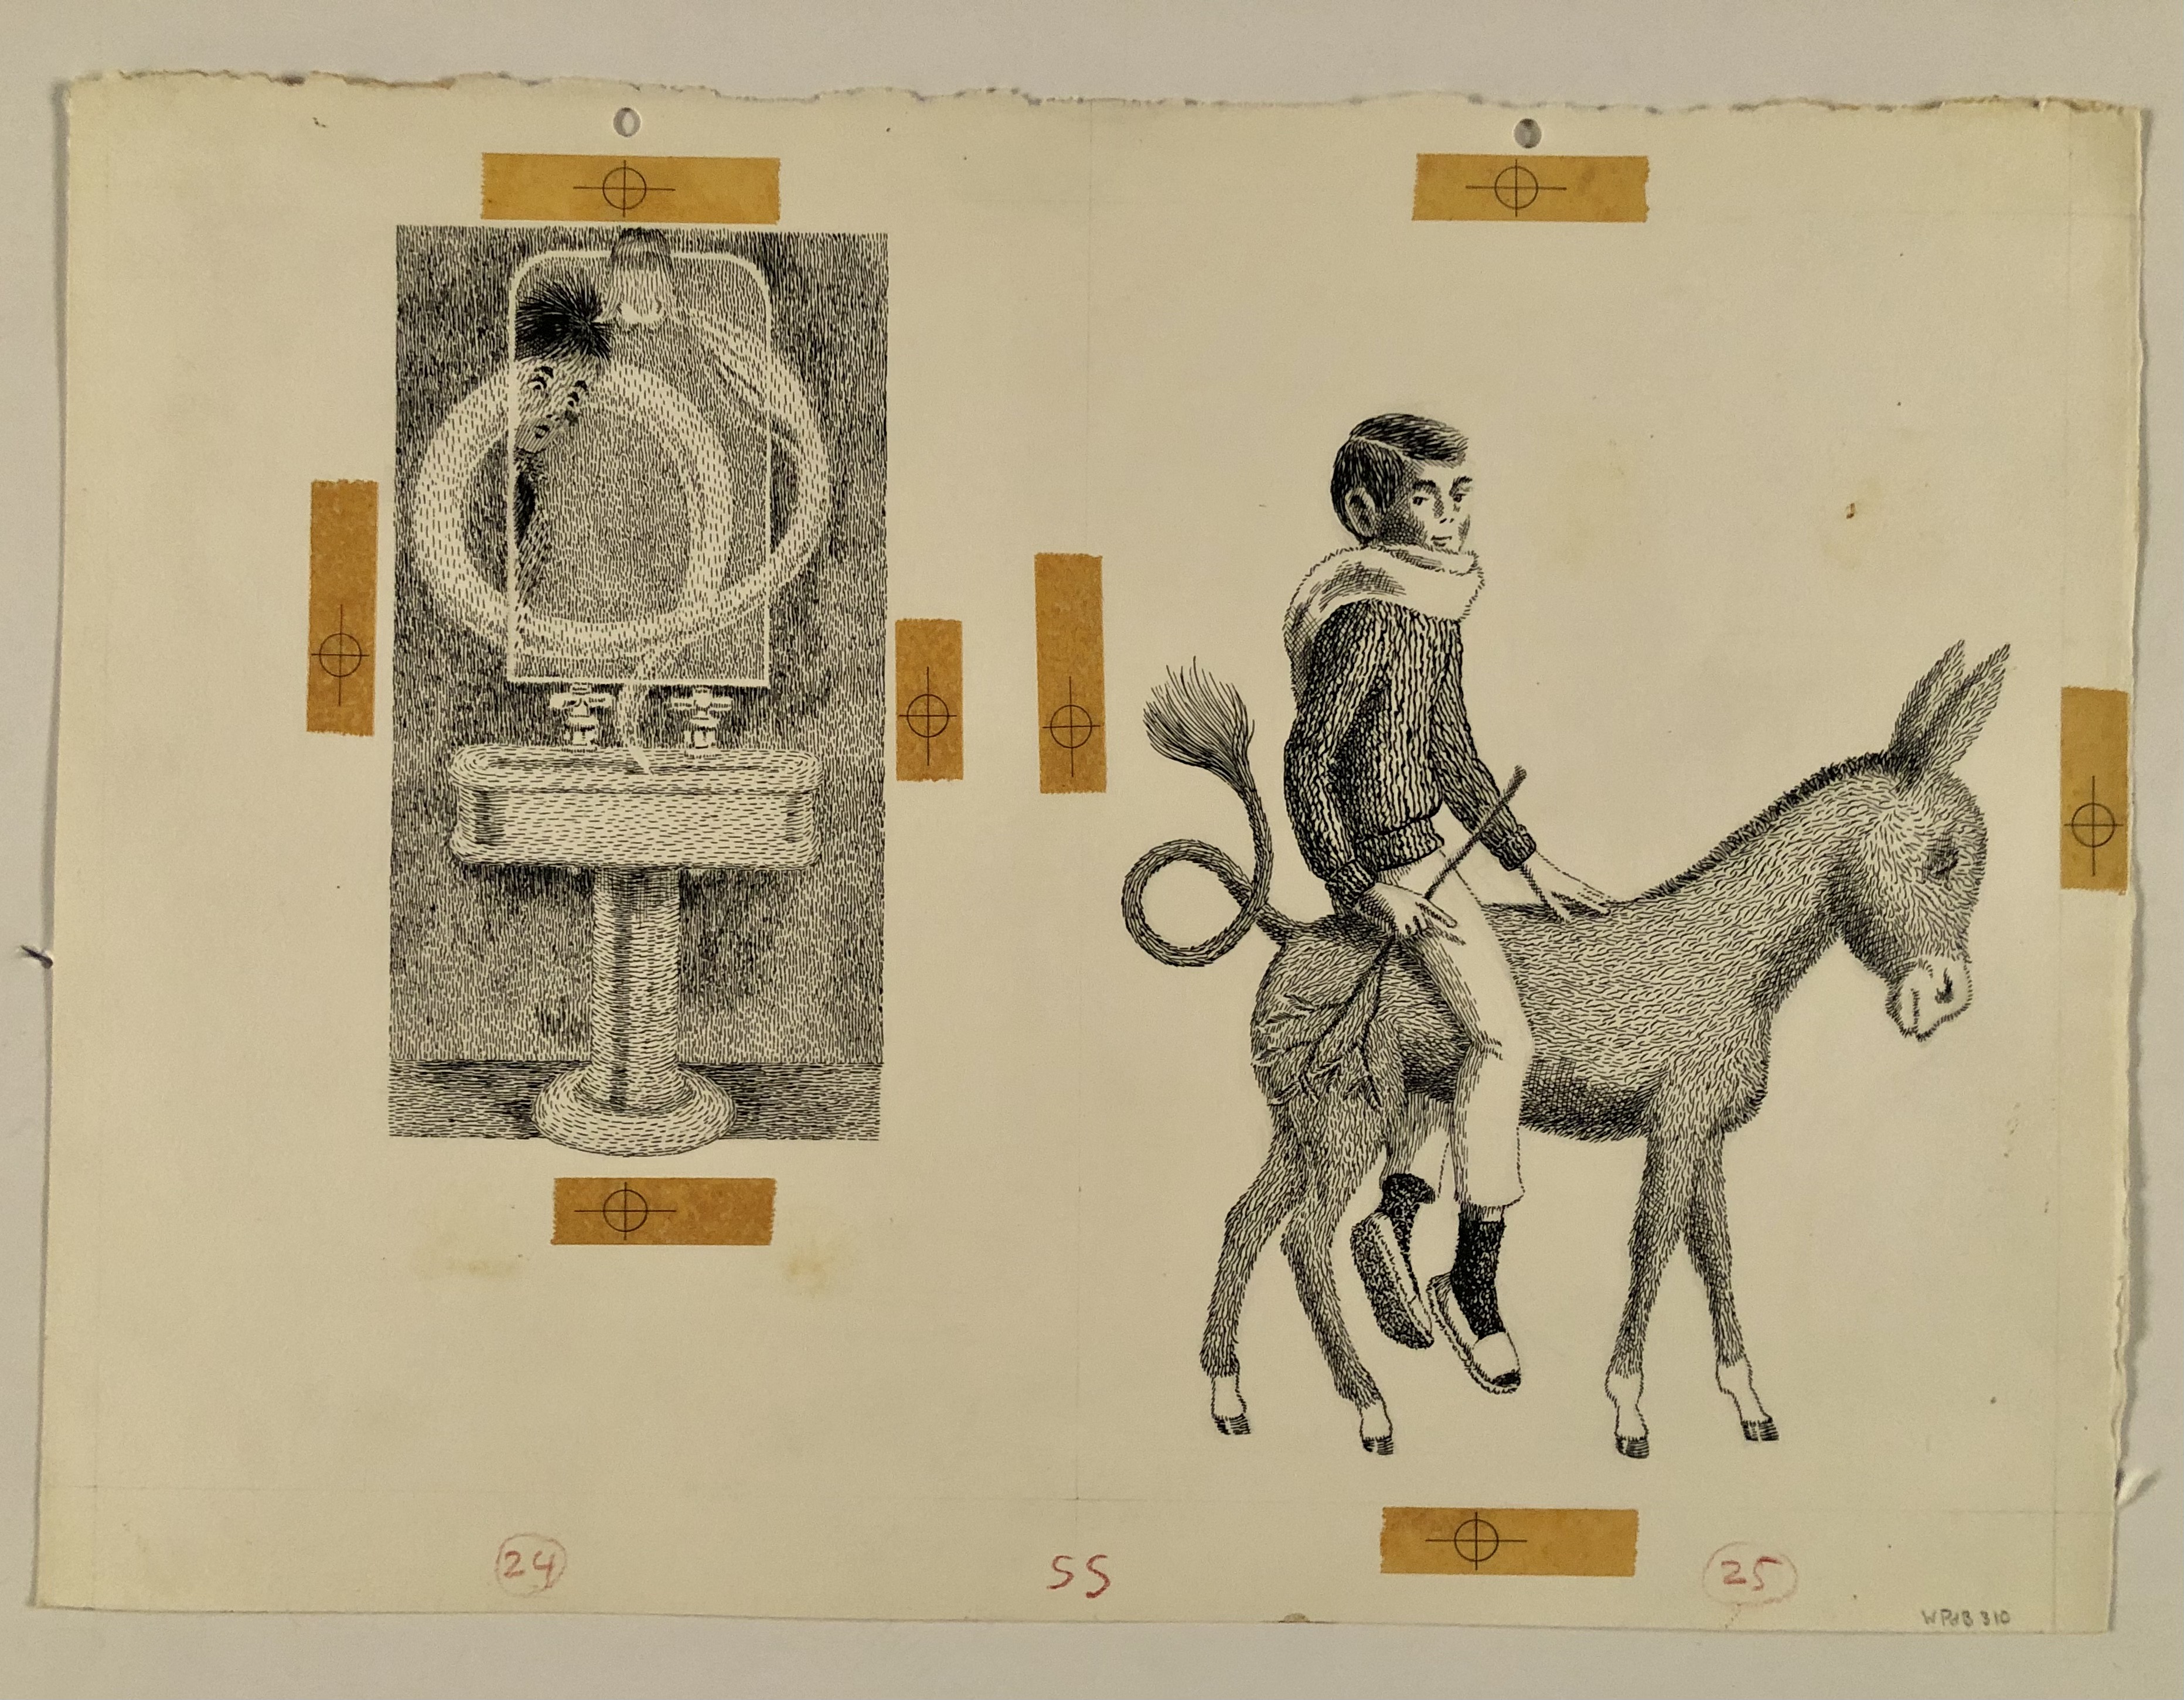 young man's face appears in mirror and young man rides a donkey